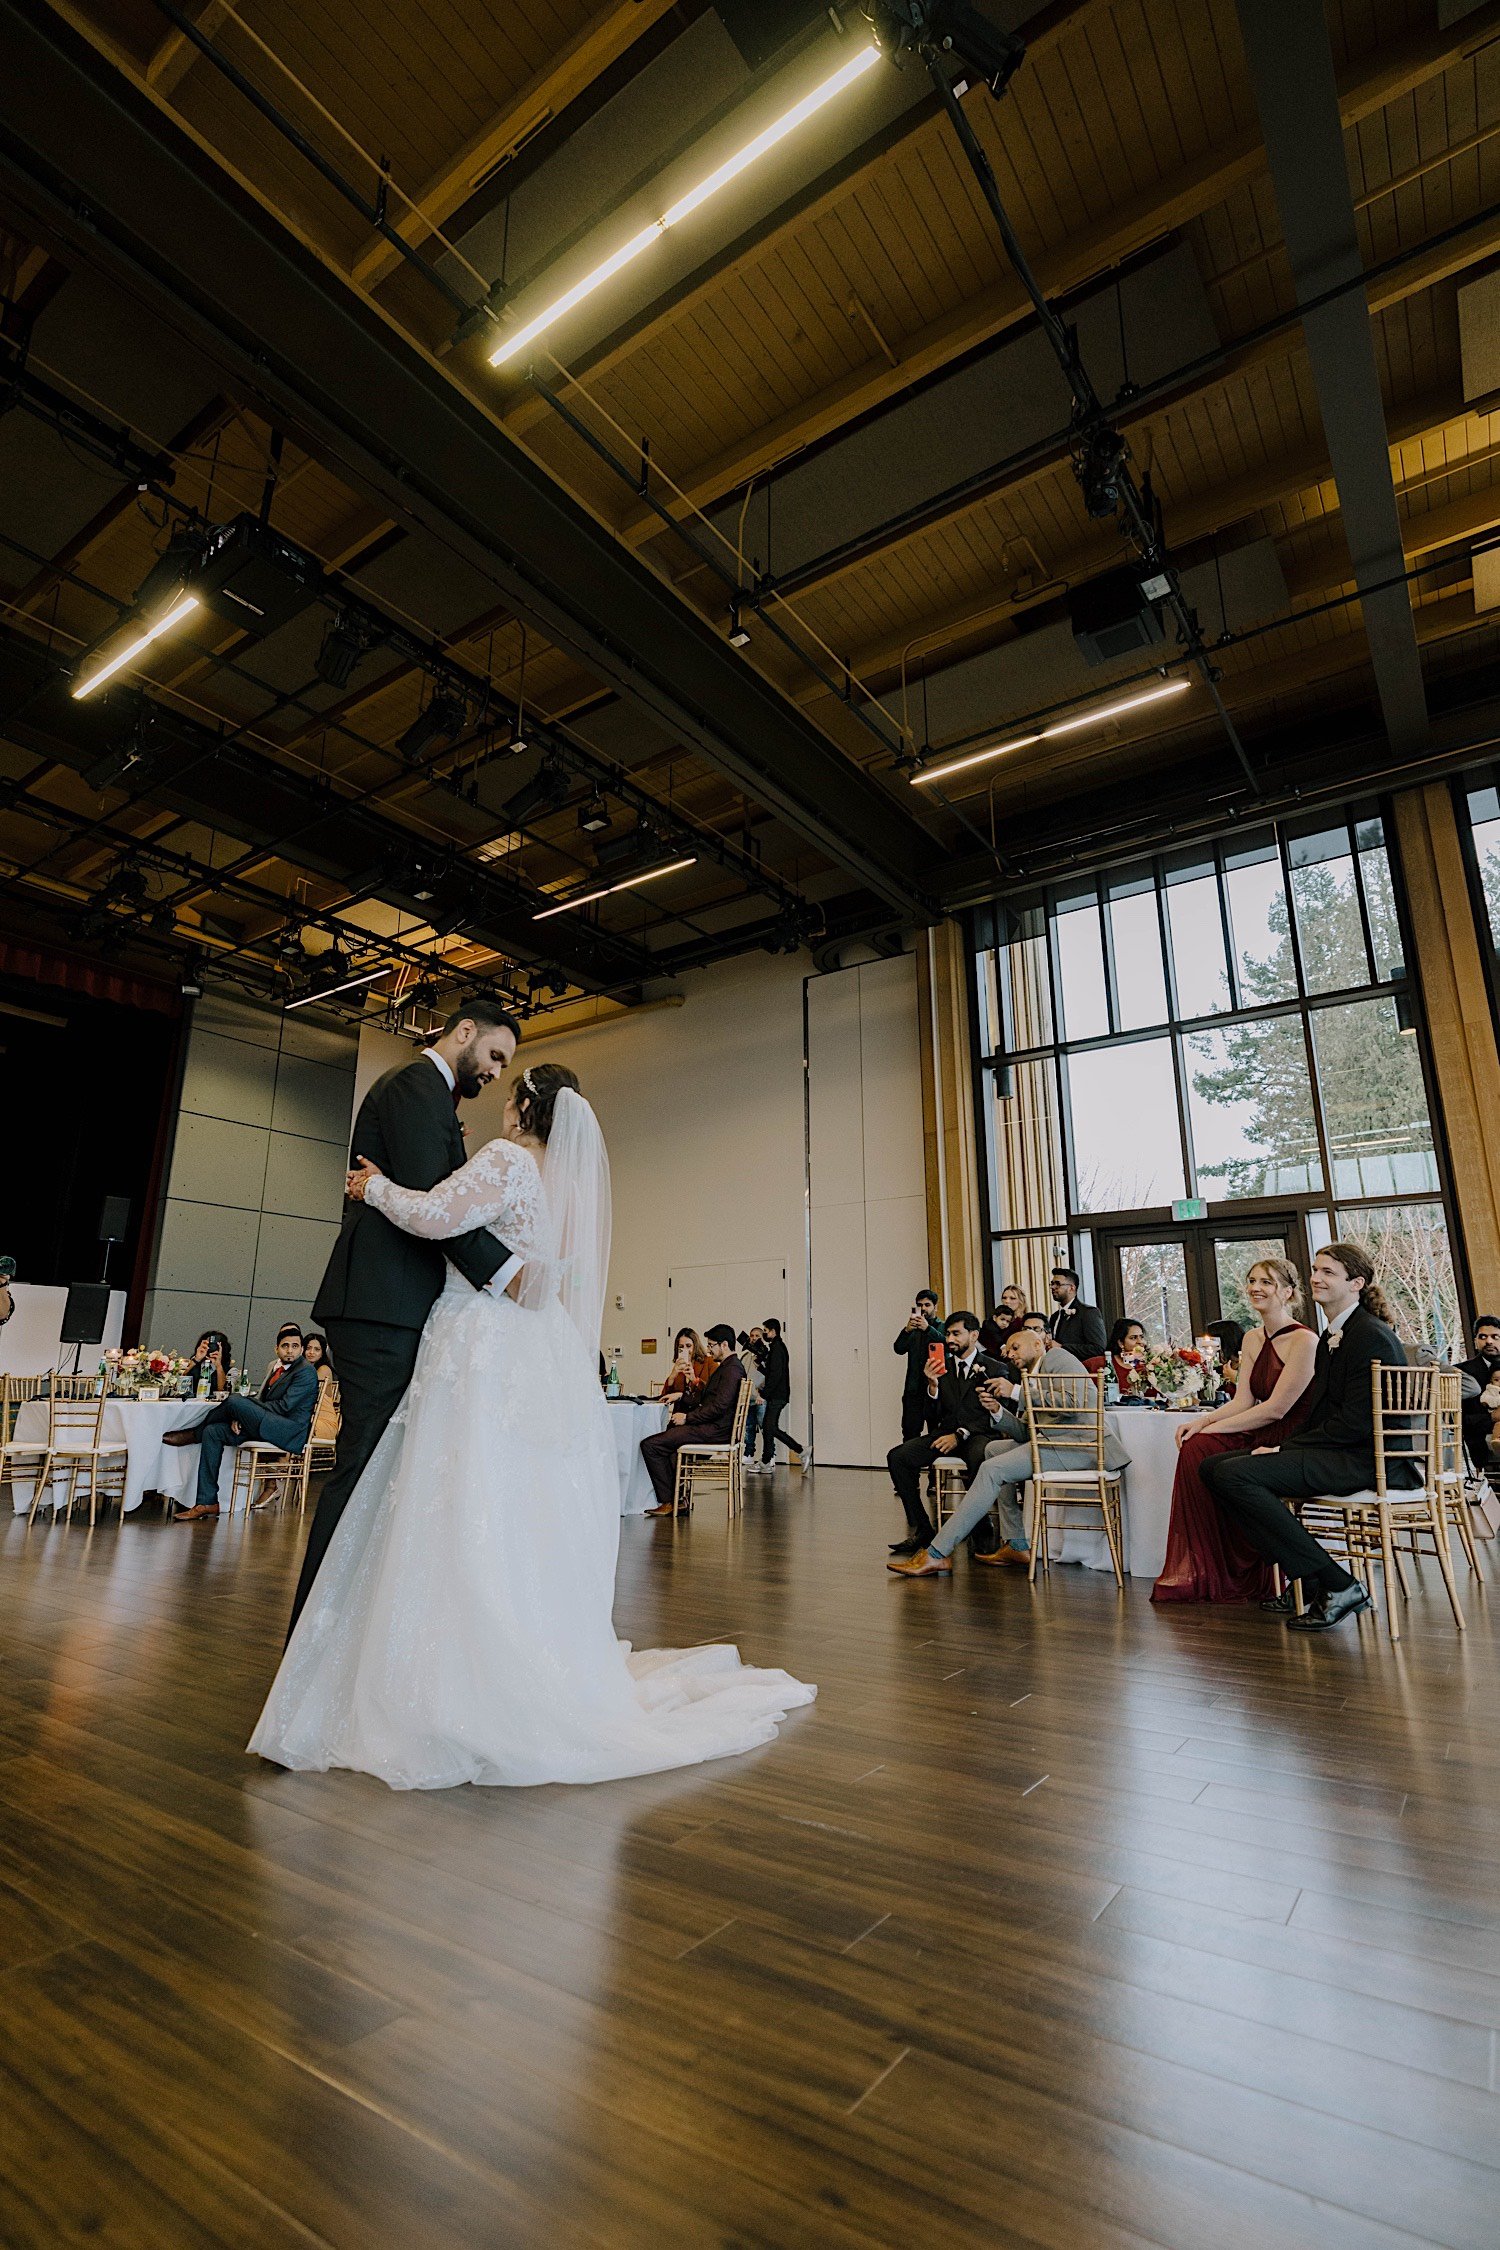 Bride and groom share their first dance together as their wedding guests watch inside the Rosehill Community Center